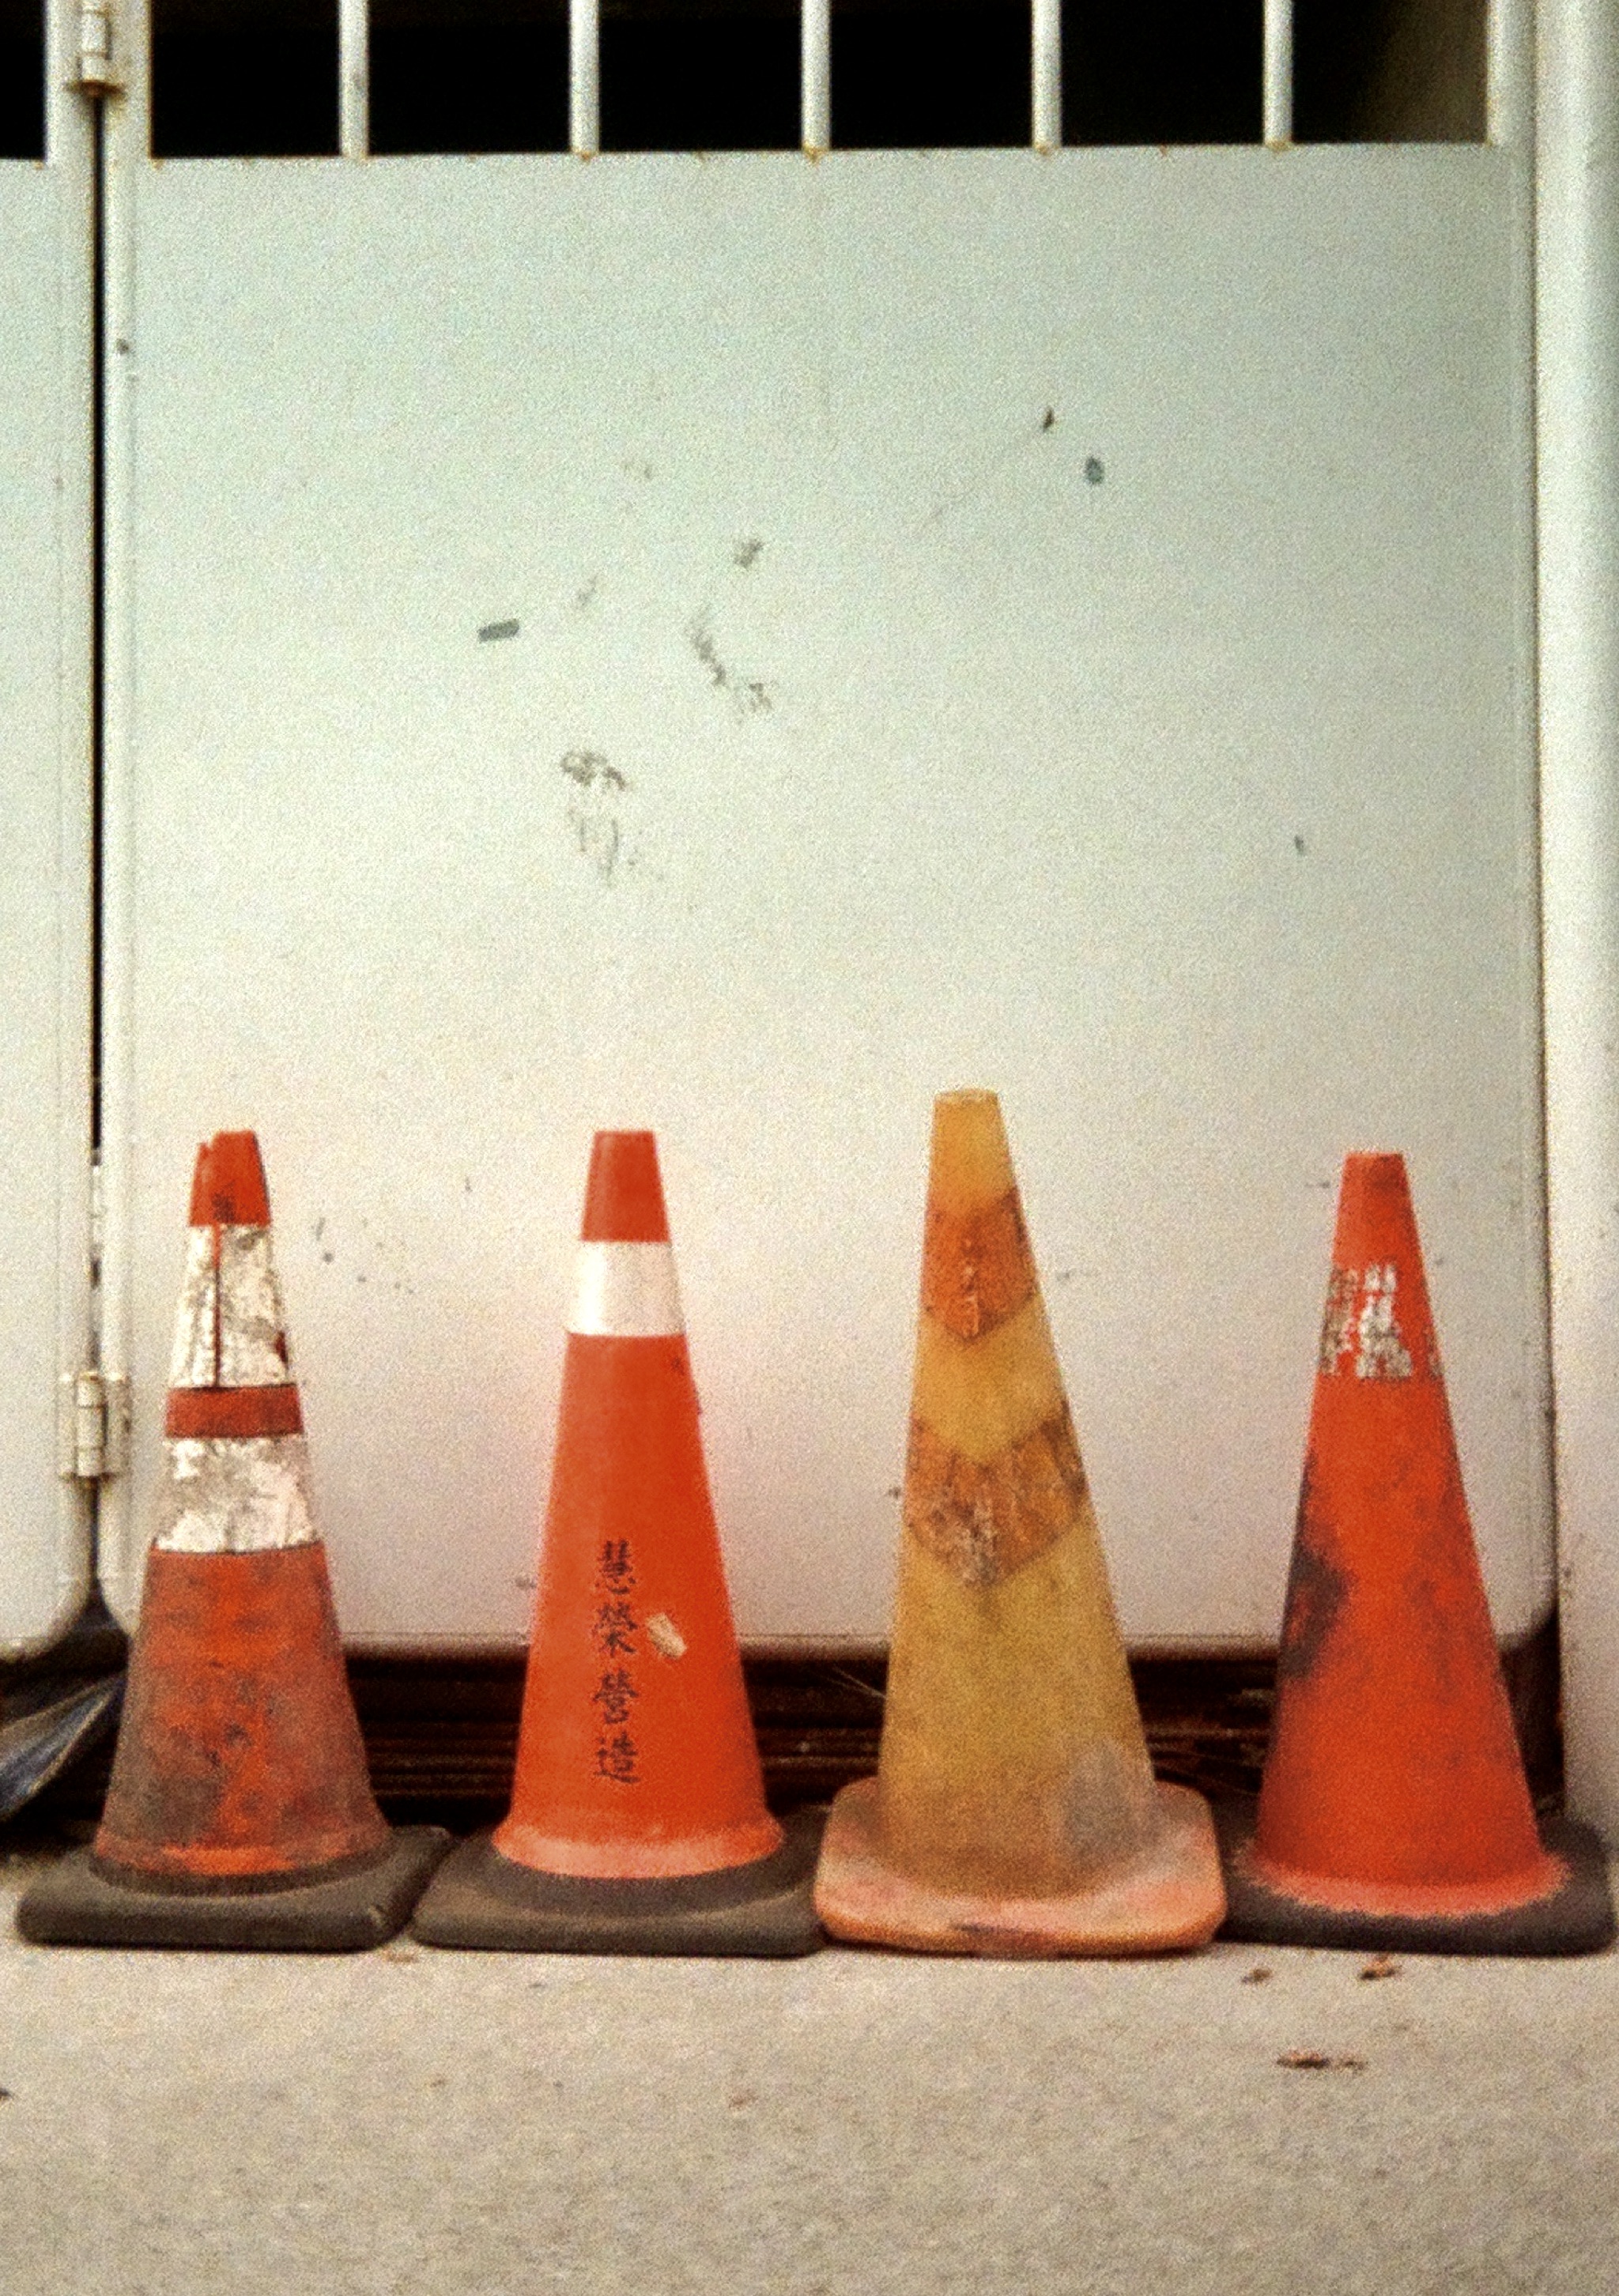 Four traffic cones in front of a white metal door